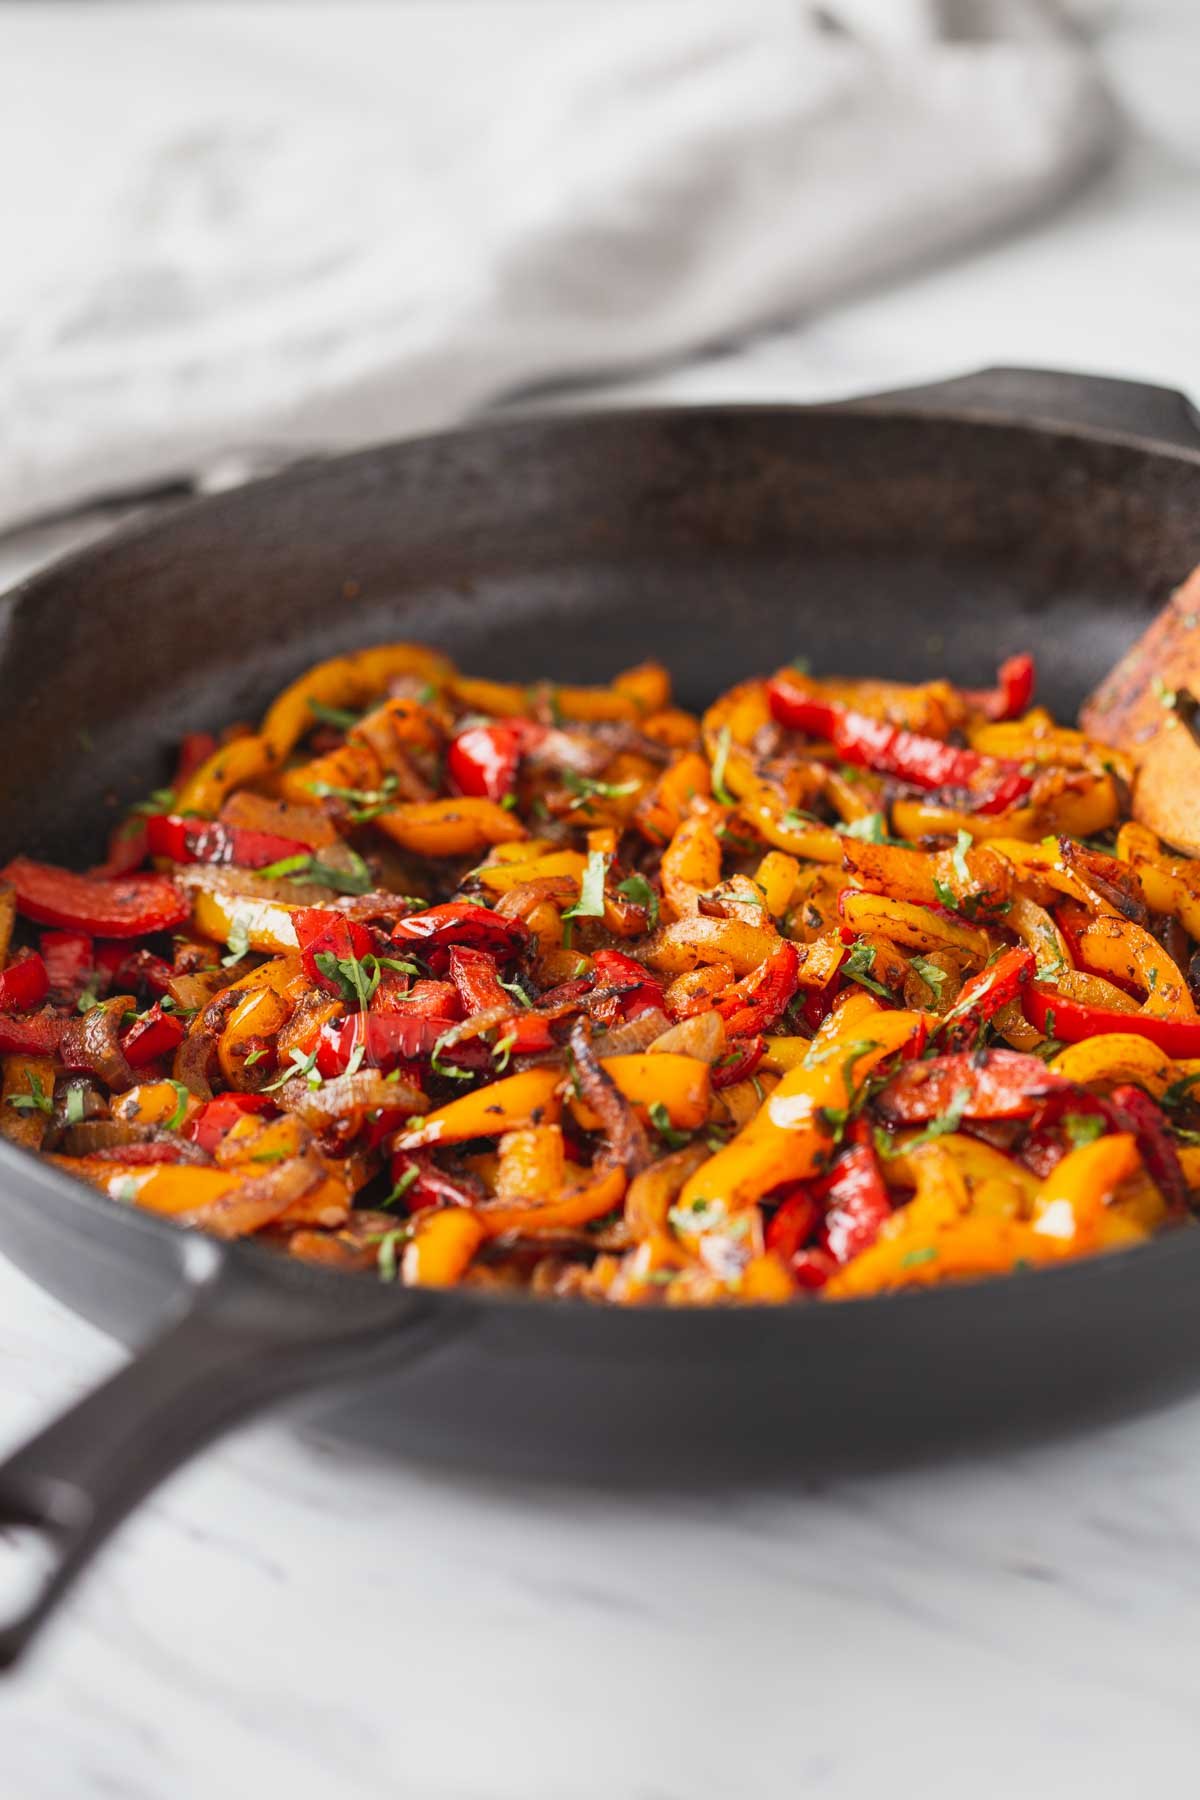 Roasted peppers and onion in a cast iron pan.